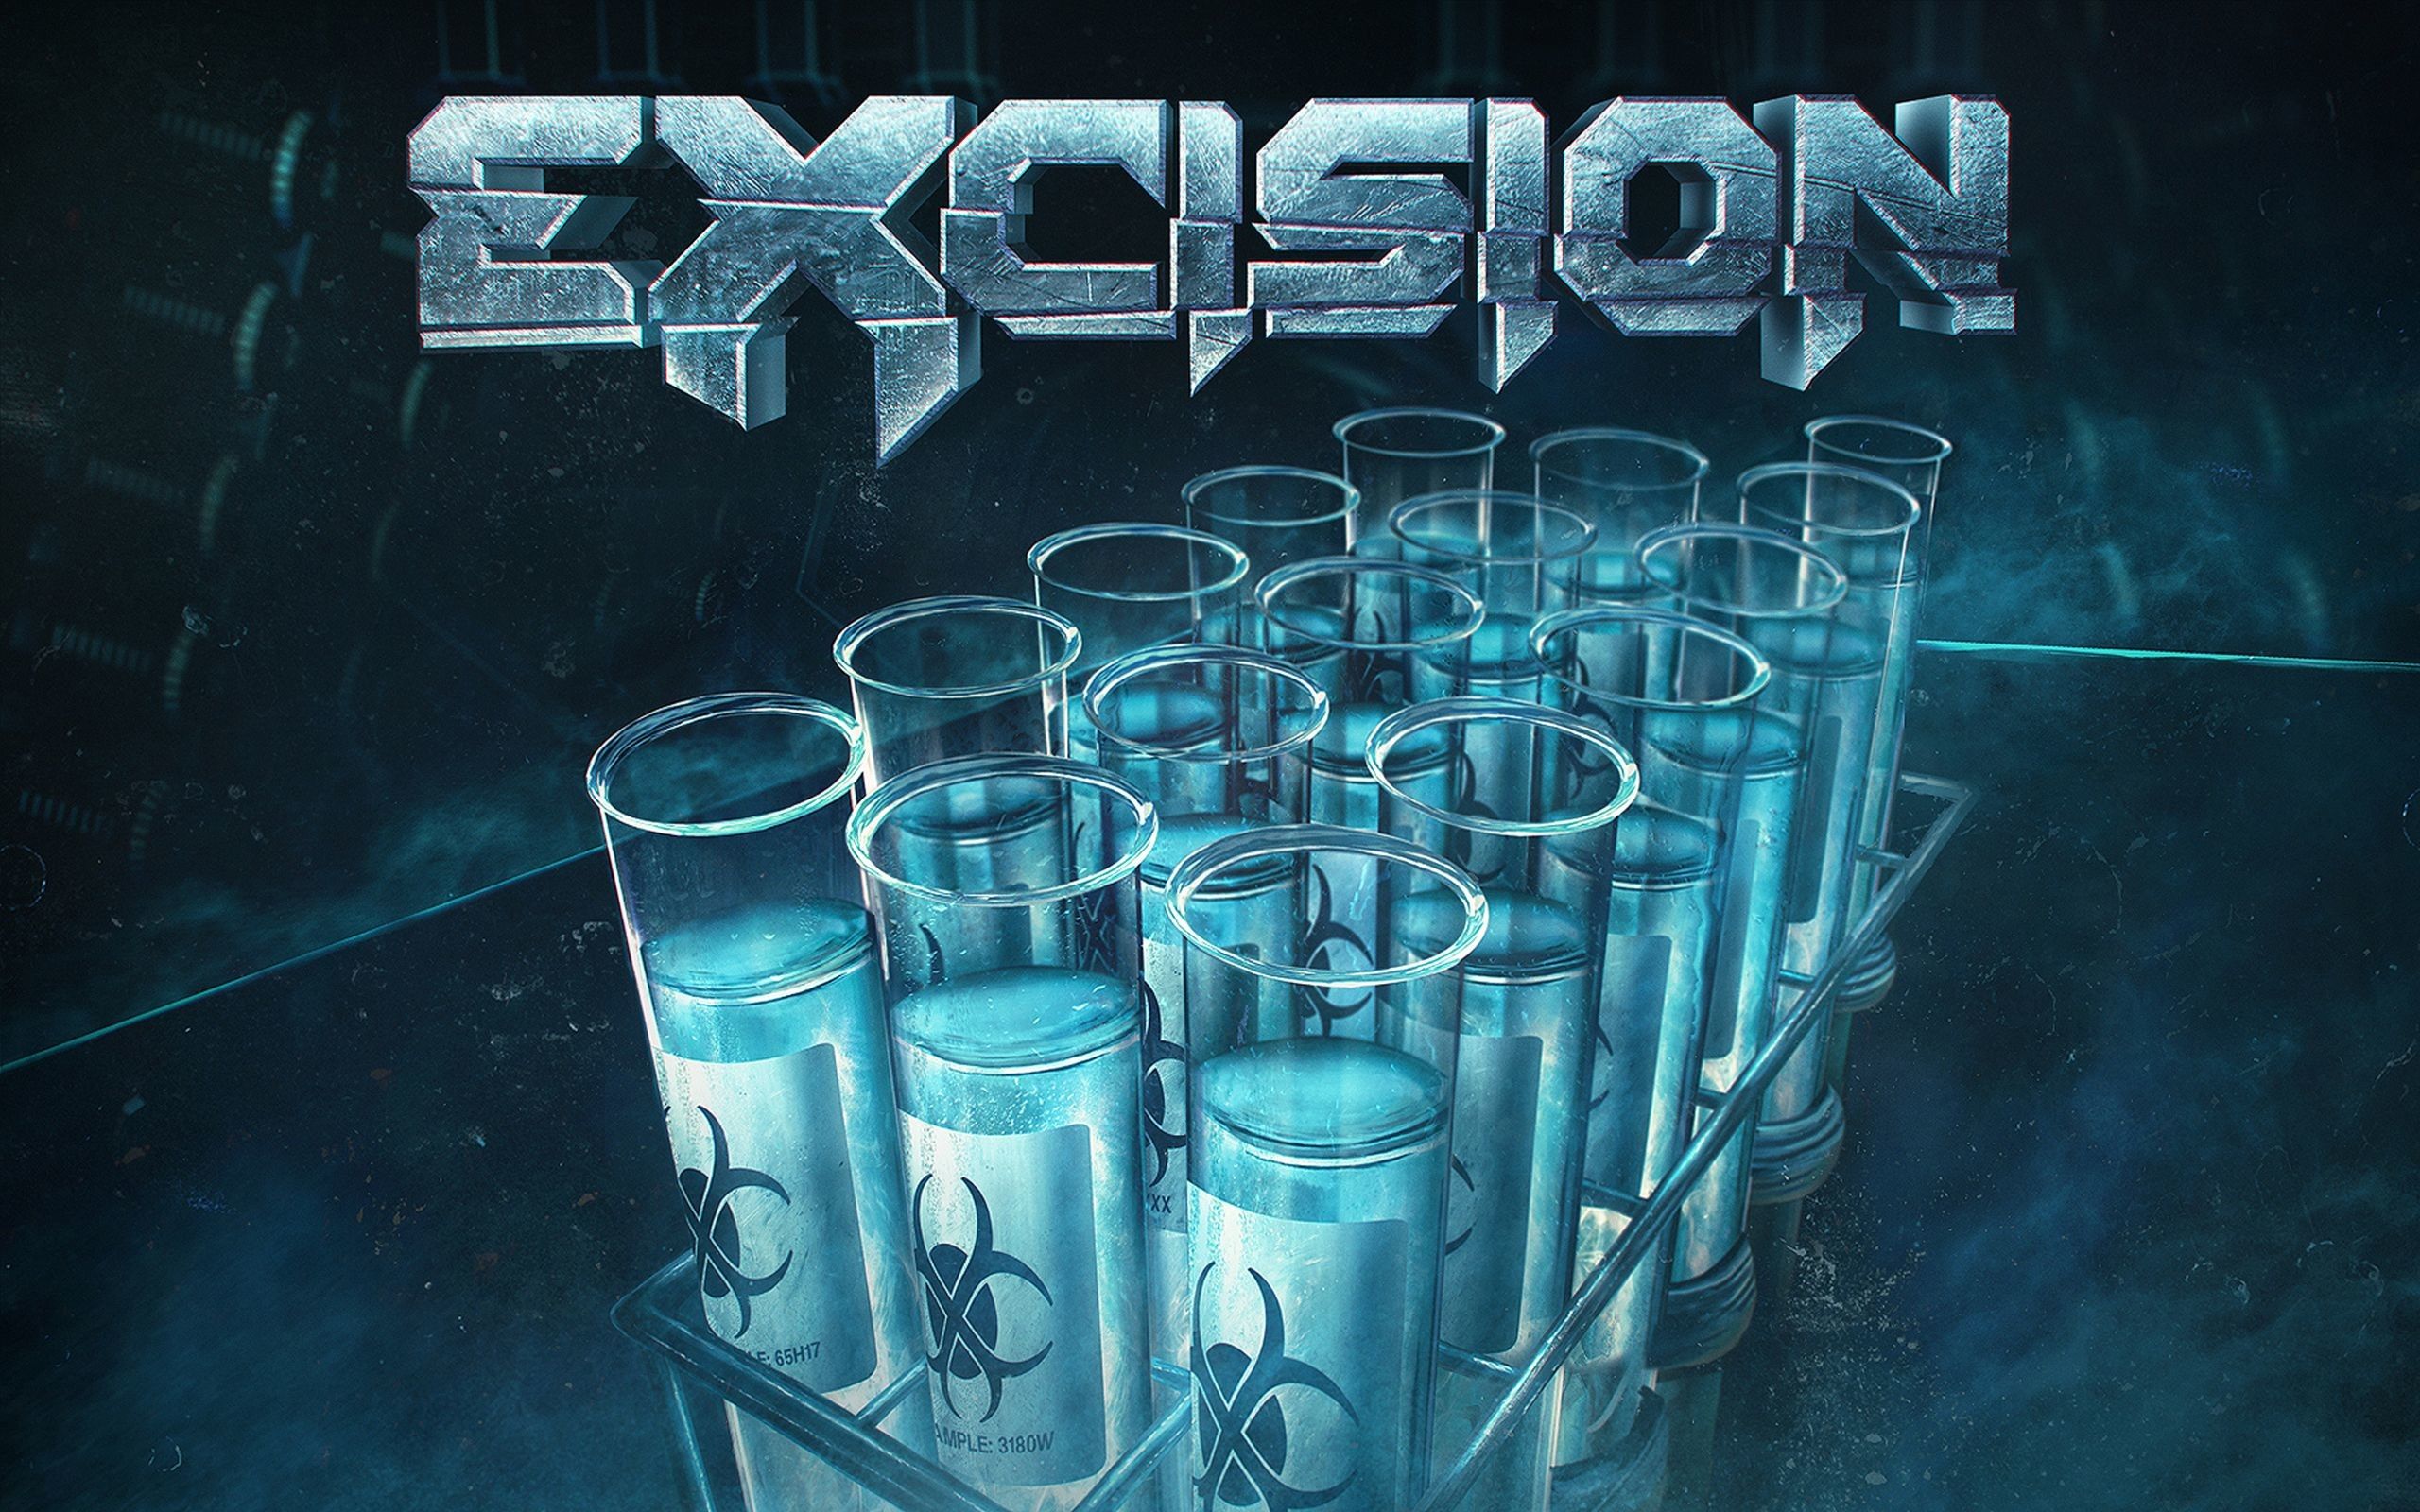 Excision Wallpaper